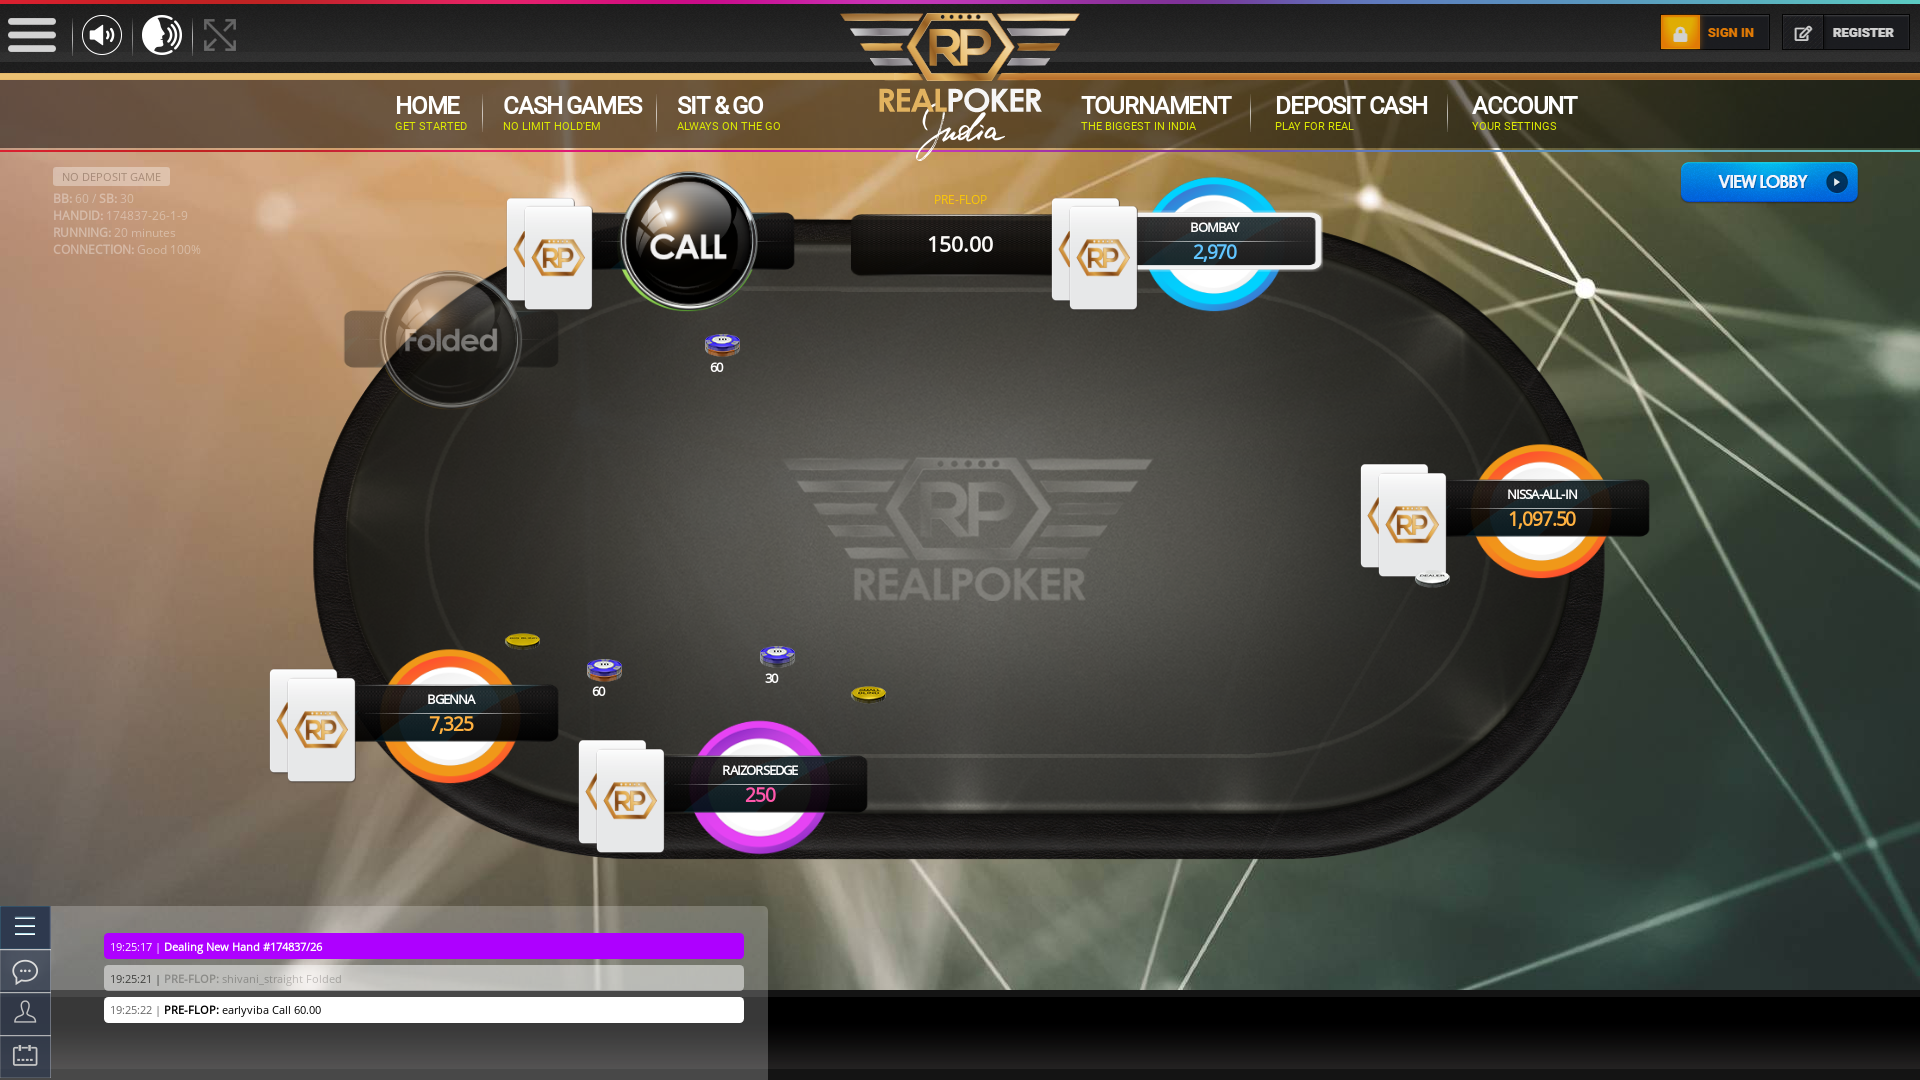 Real poker 10 player table in the 20th minute of the match